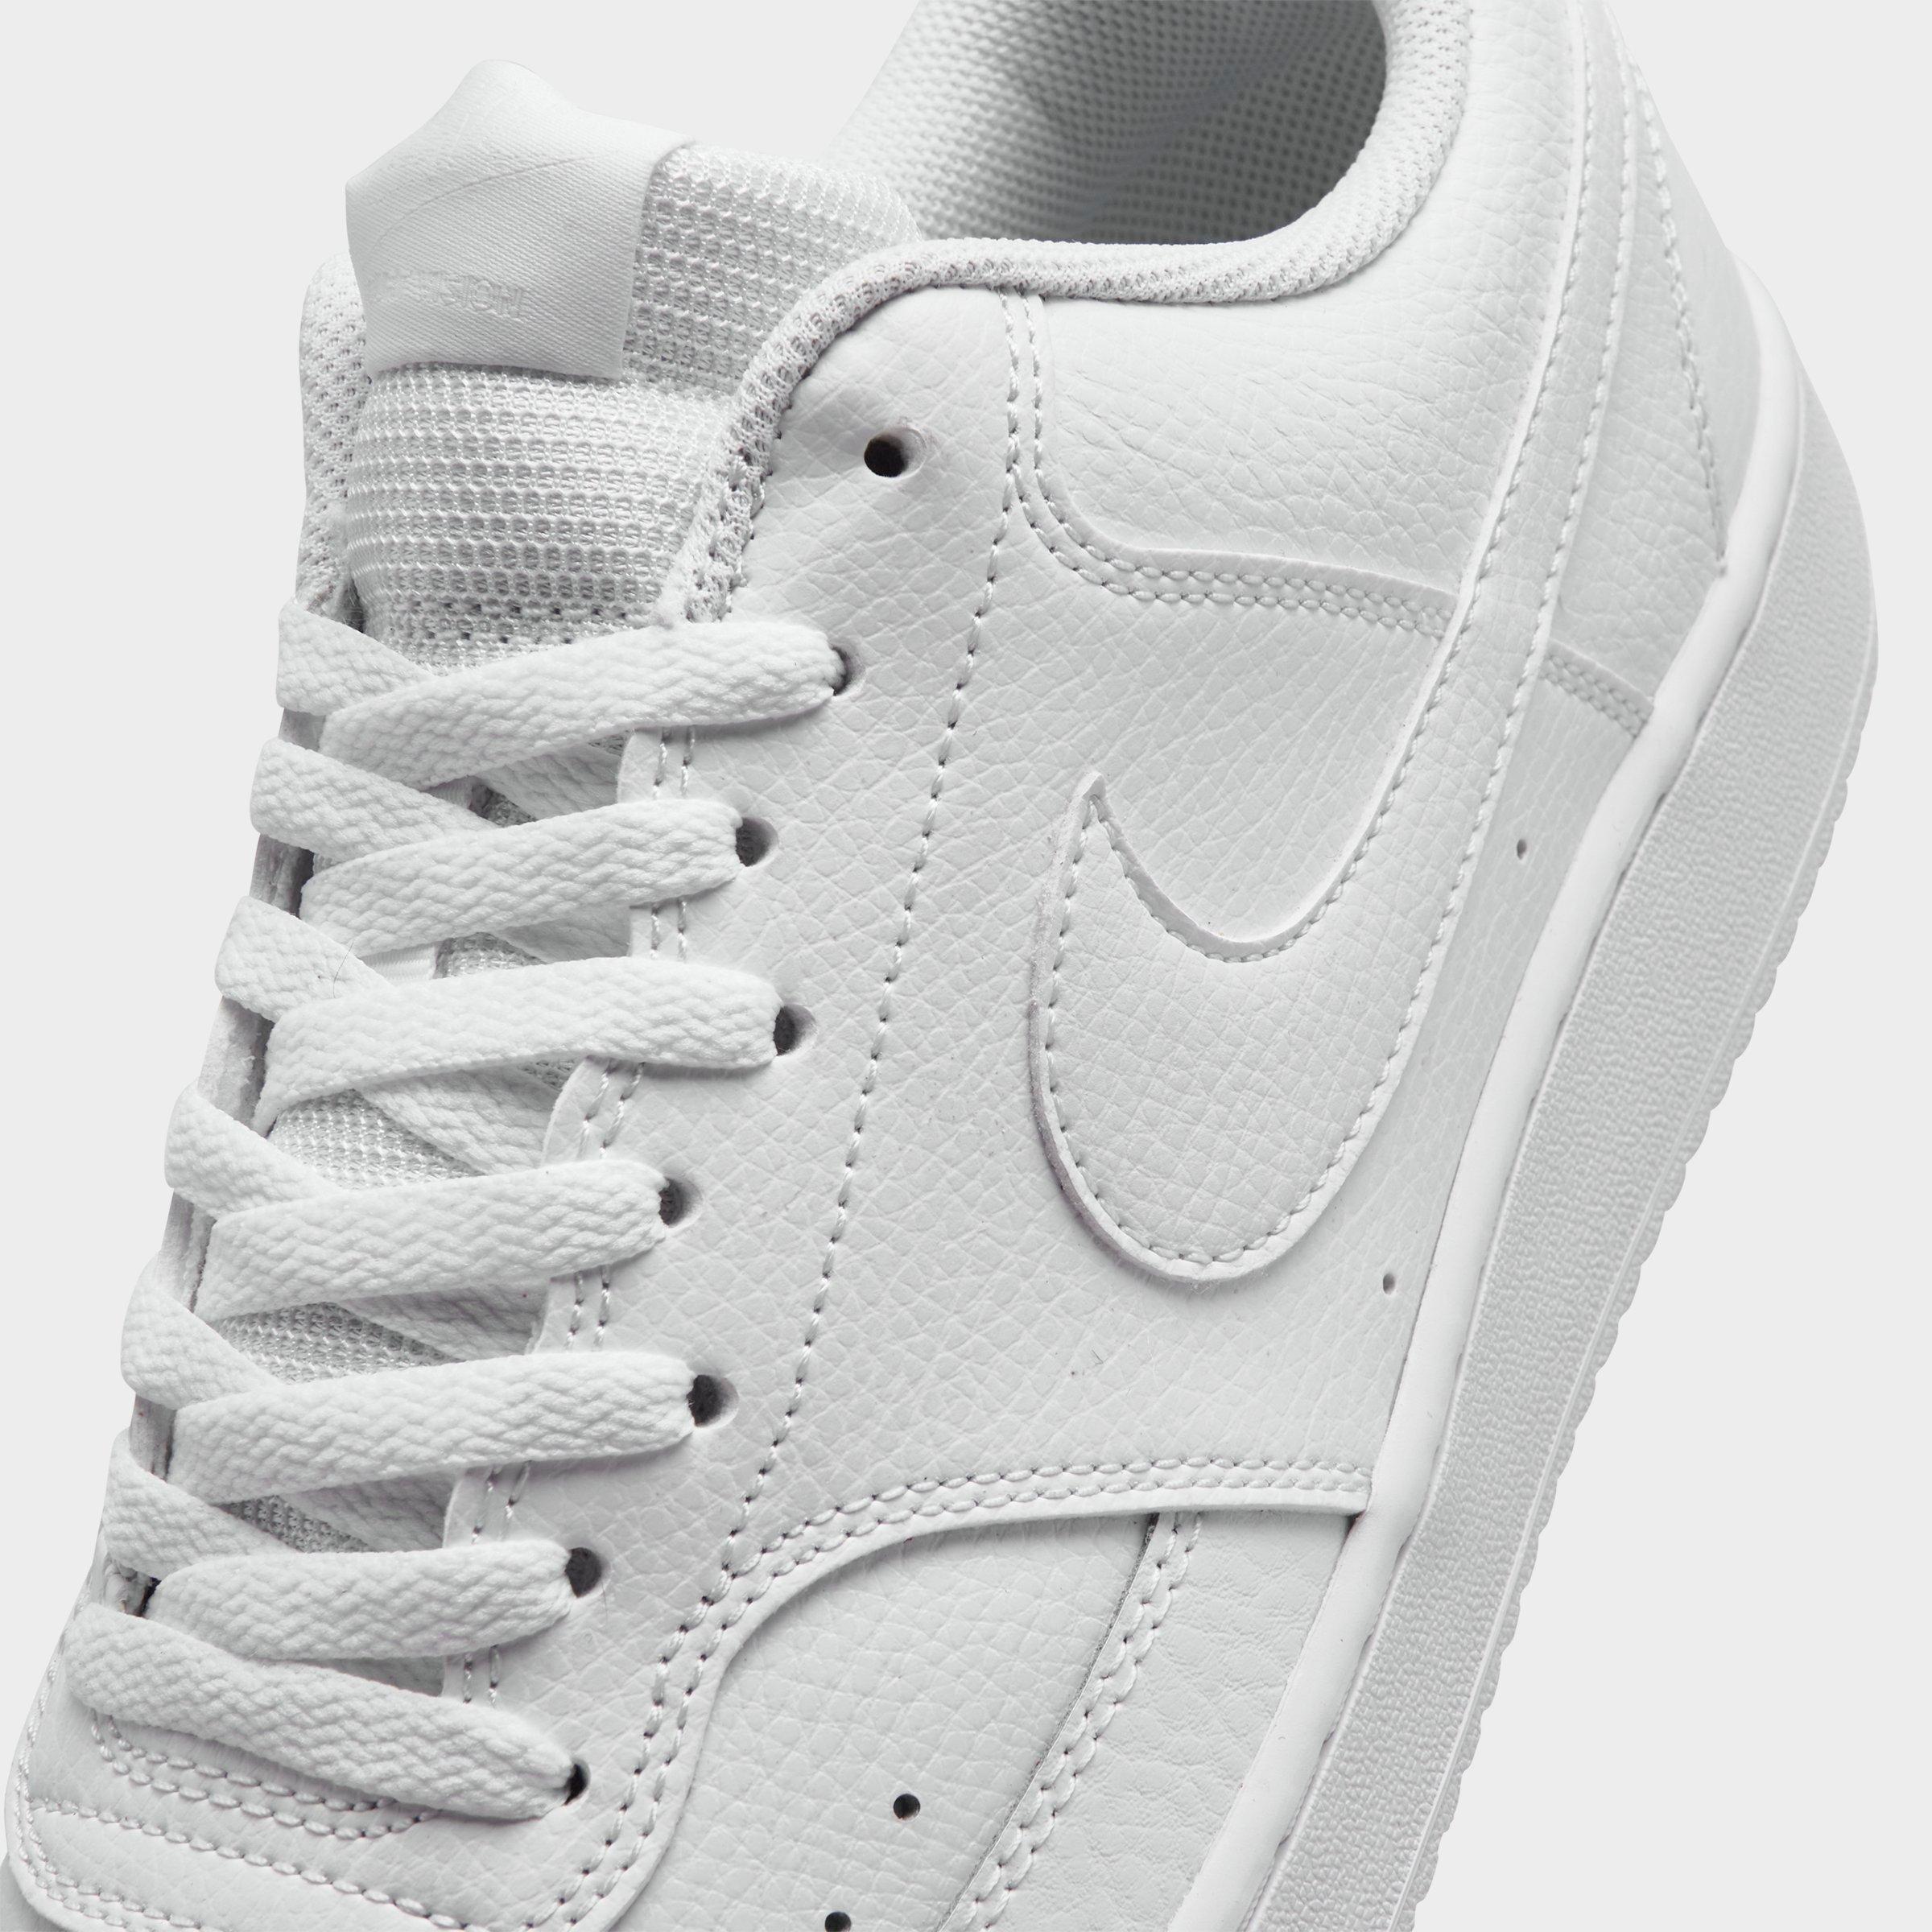 women's nikecourt vision low casual sneakers from finish line